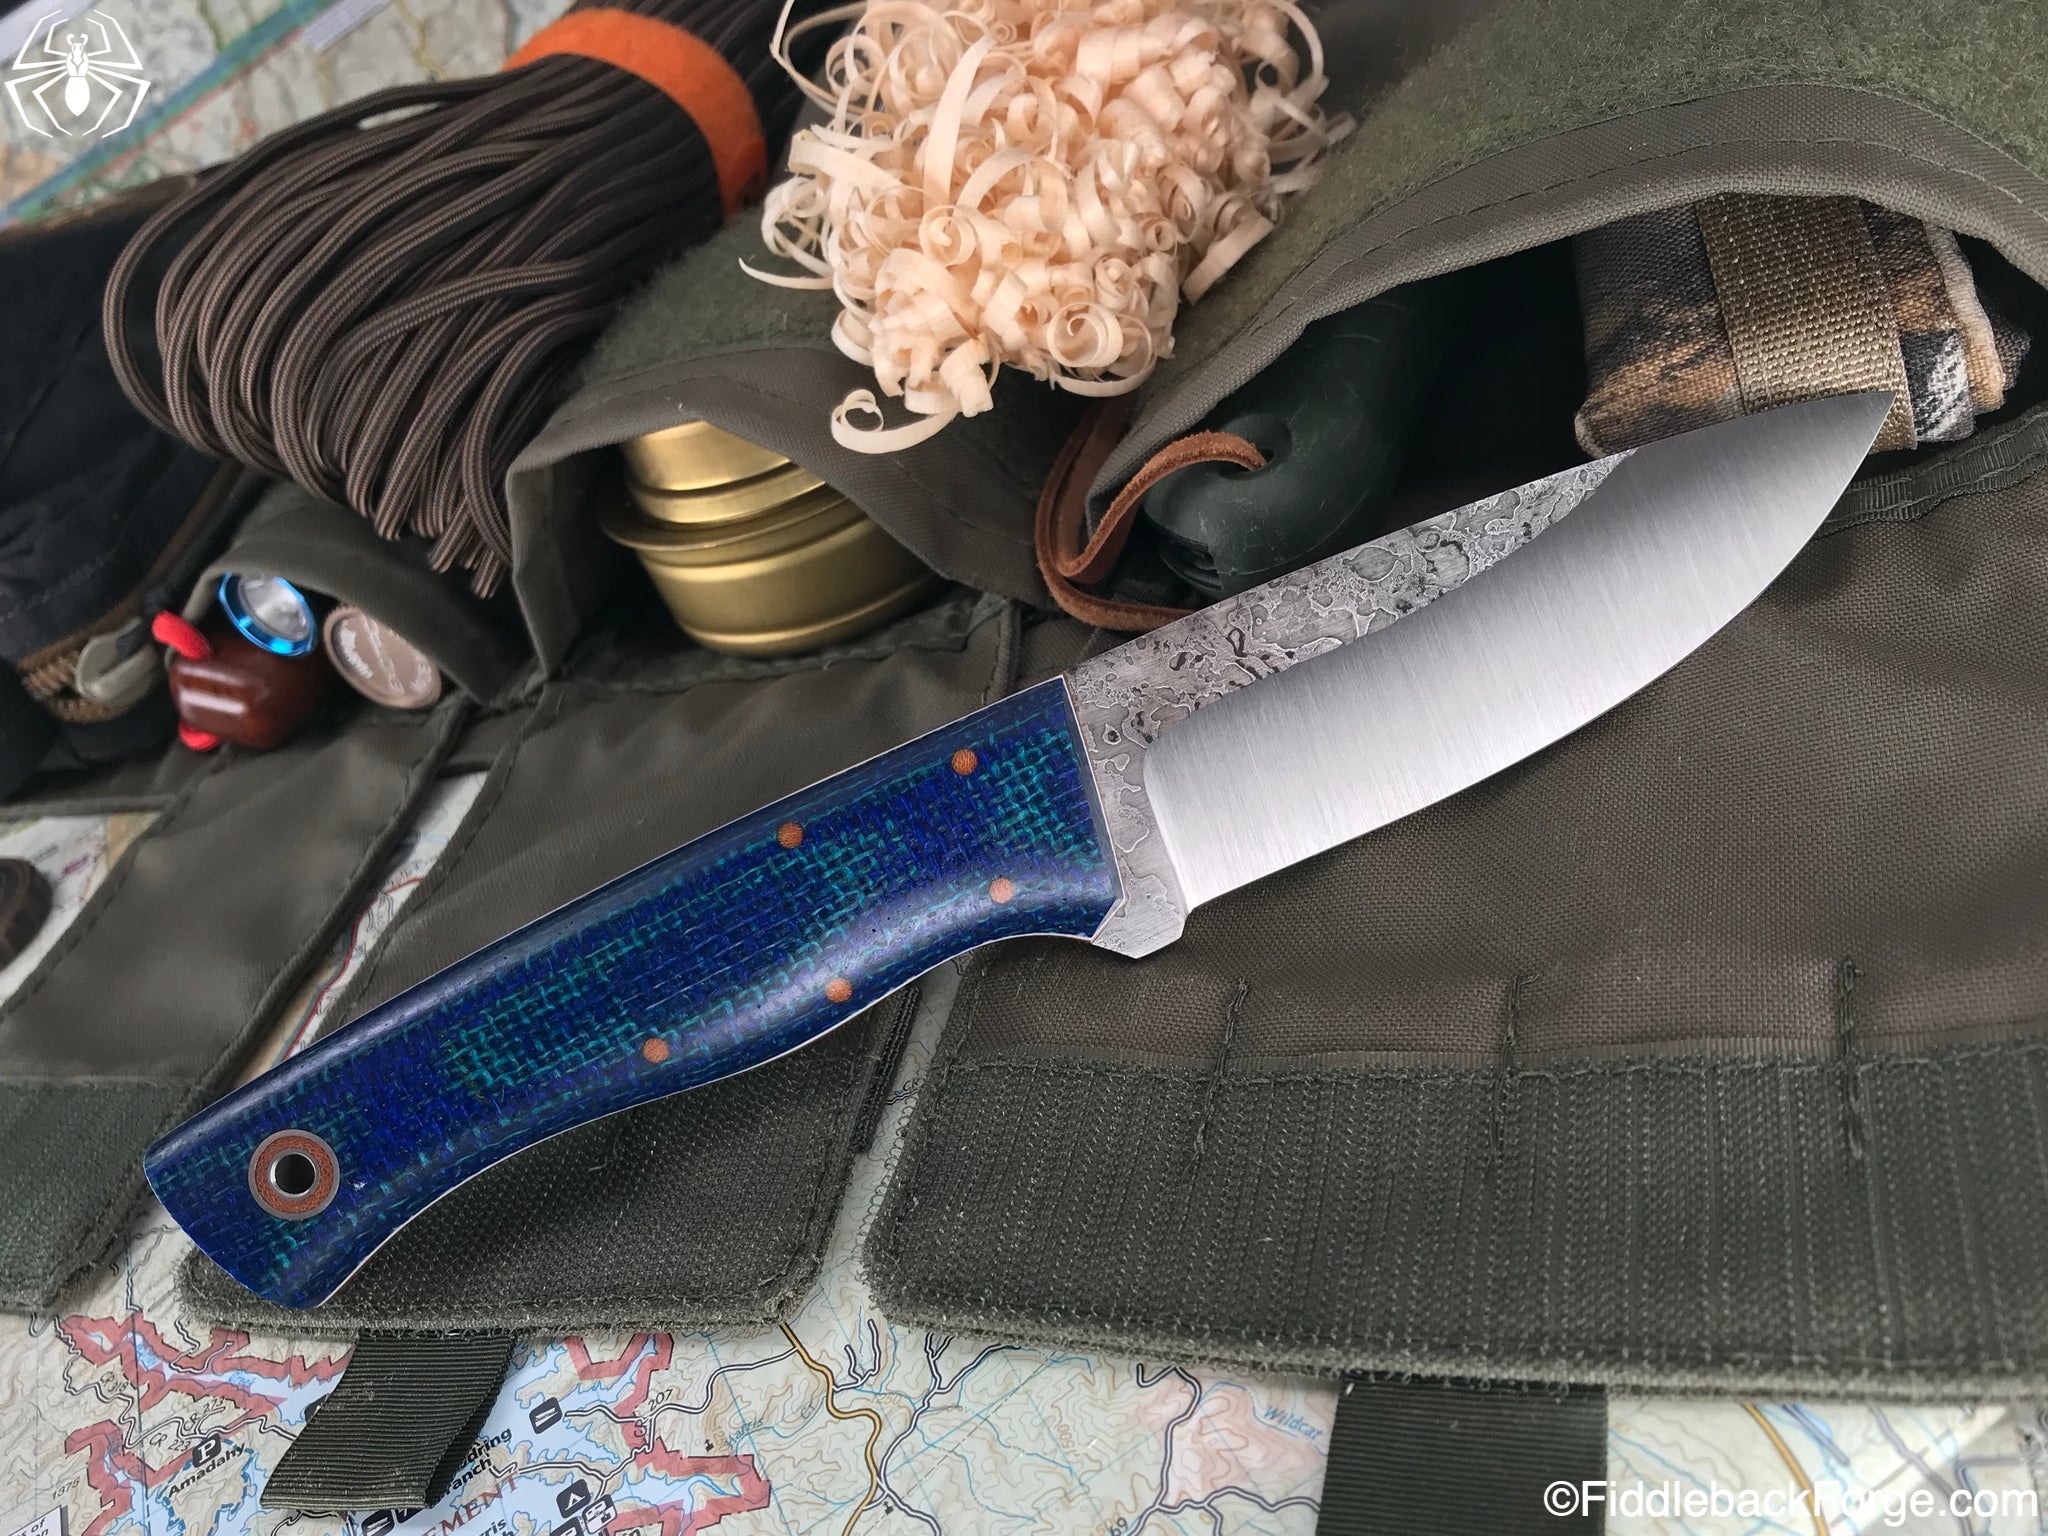 Get a Grip - Pro Tips on How to Shape a Knife Handle - Fiddleback Forge